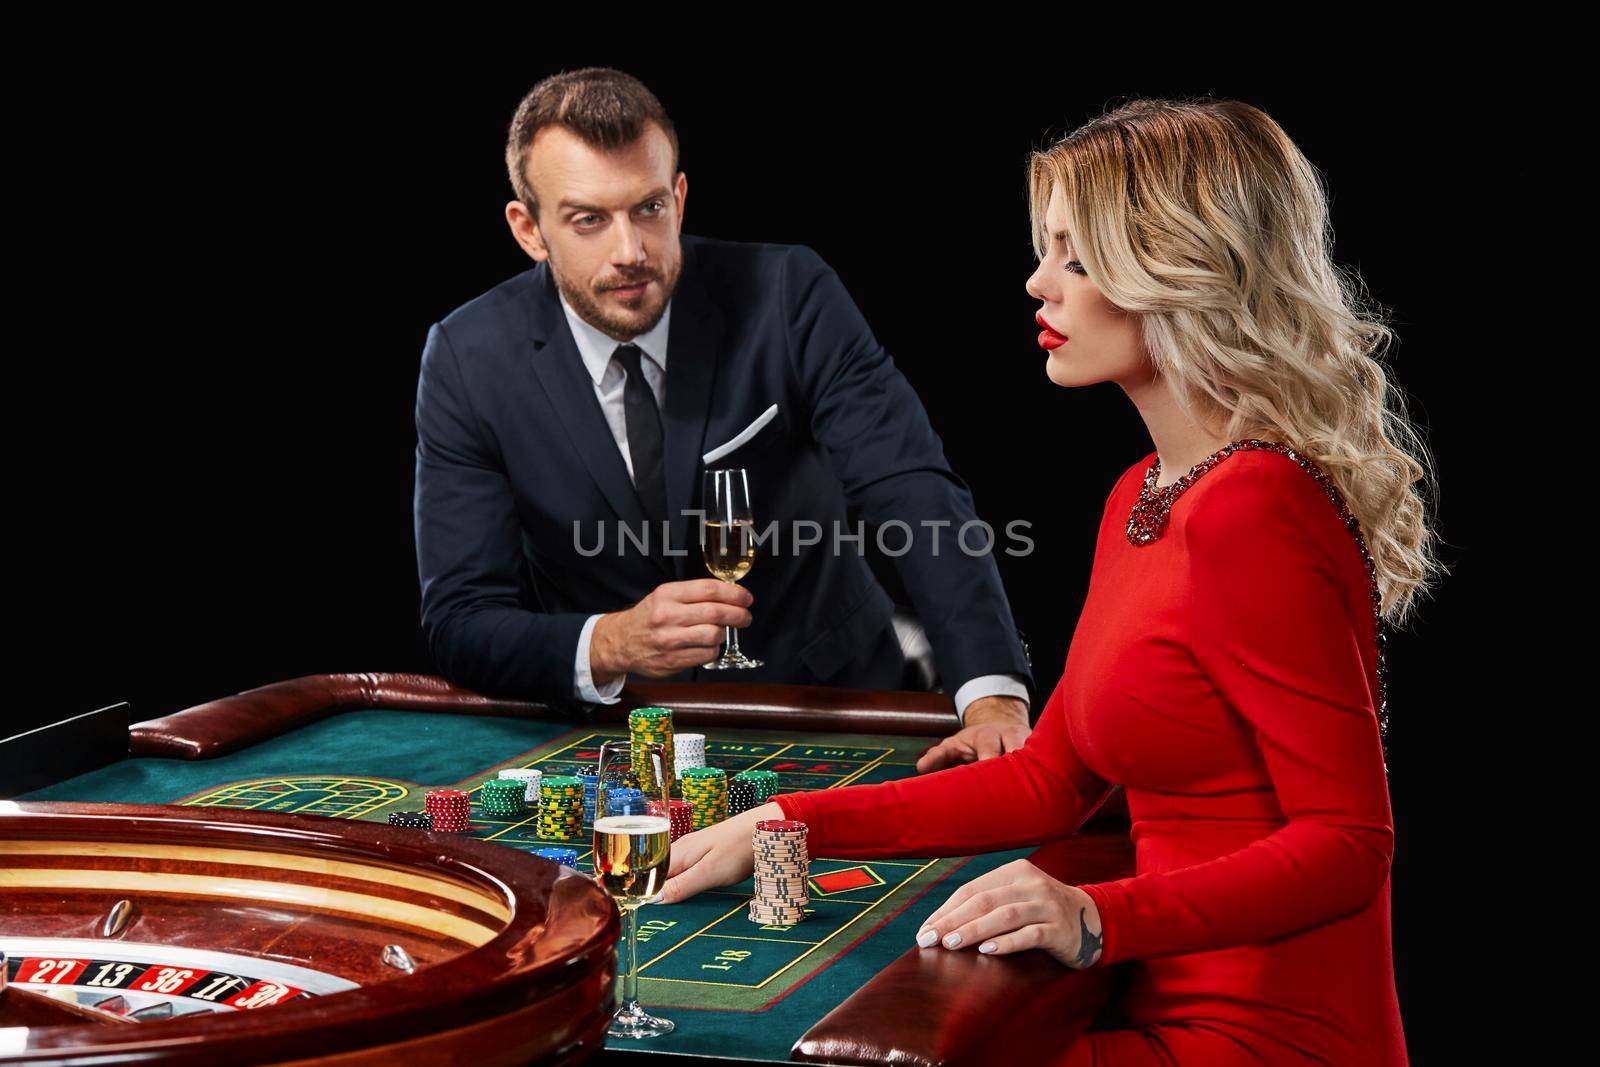 Couple playing roulette wins at the casino. by nazarovsergey